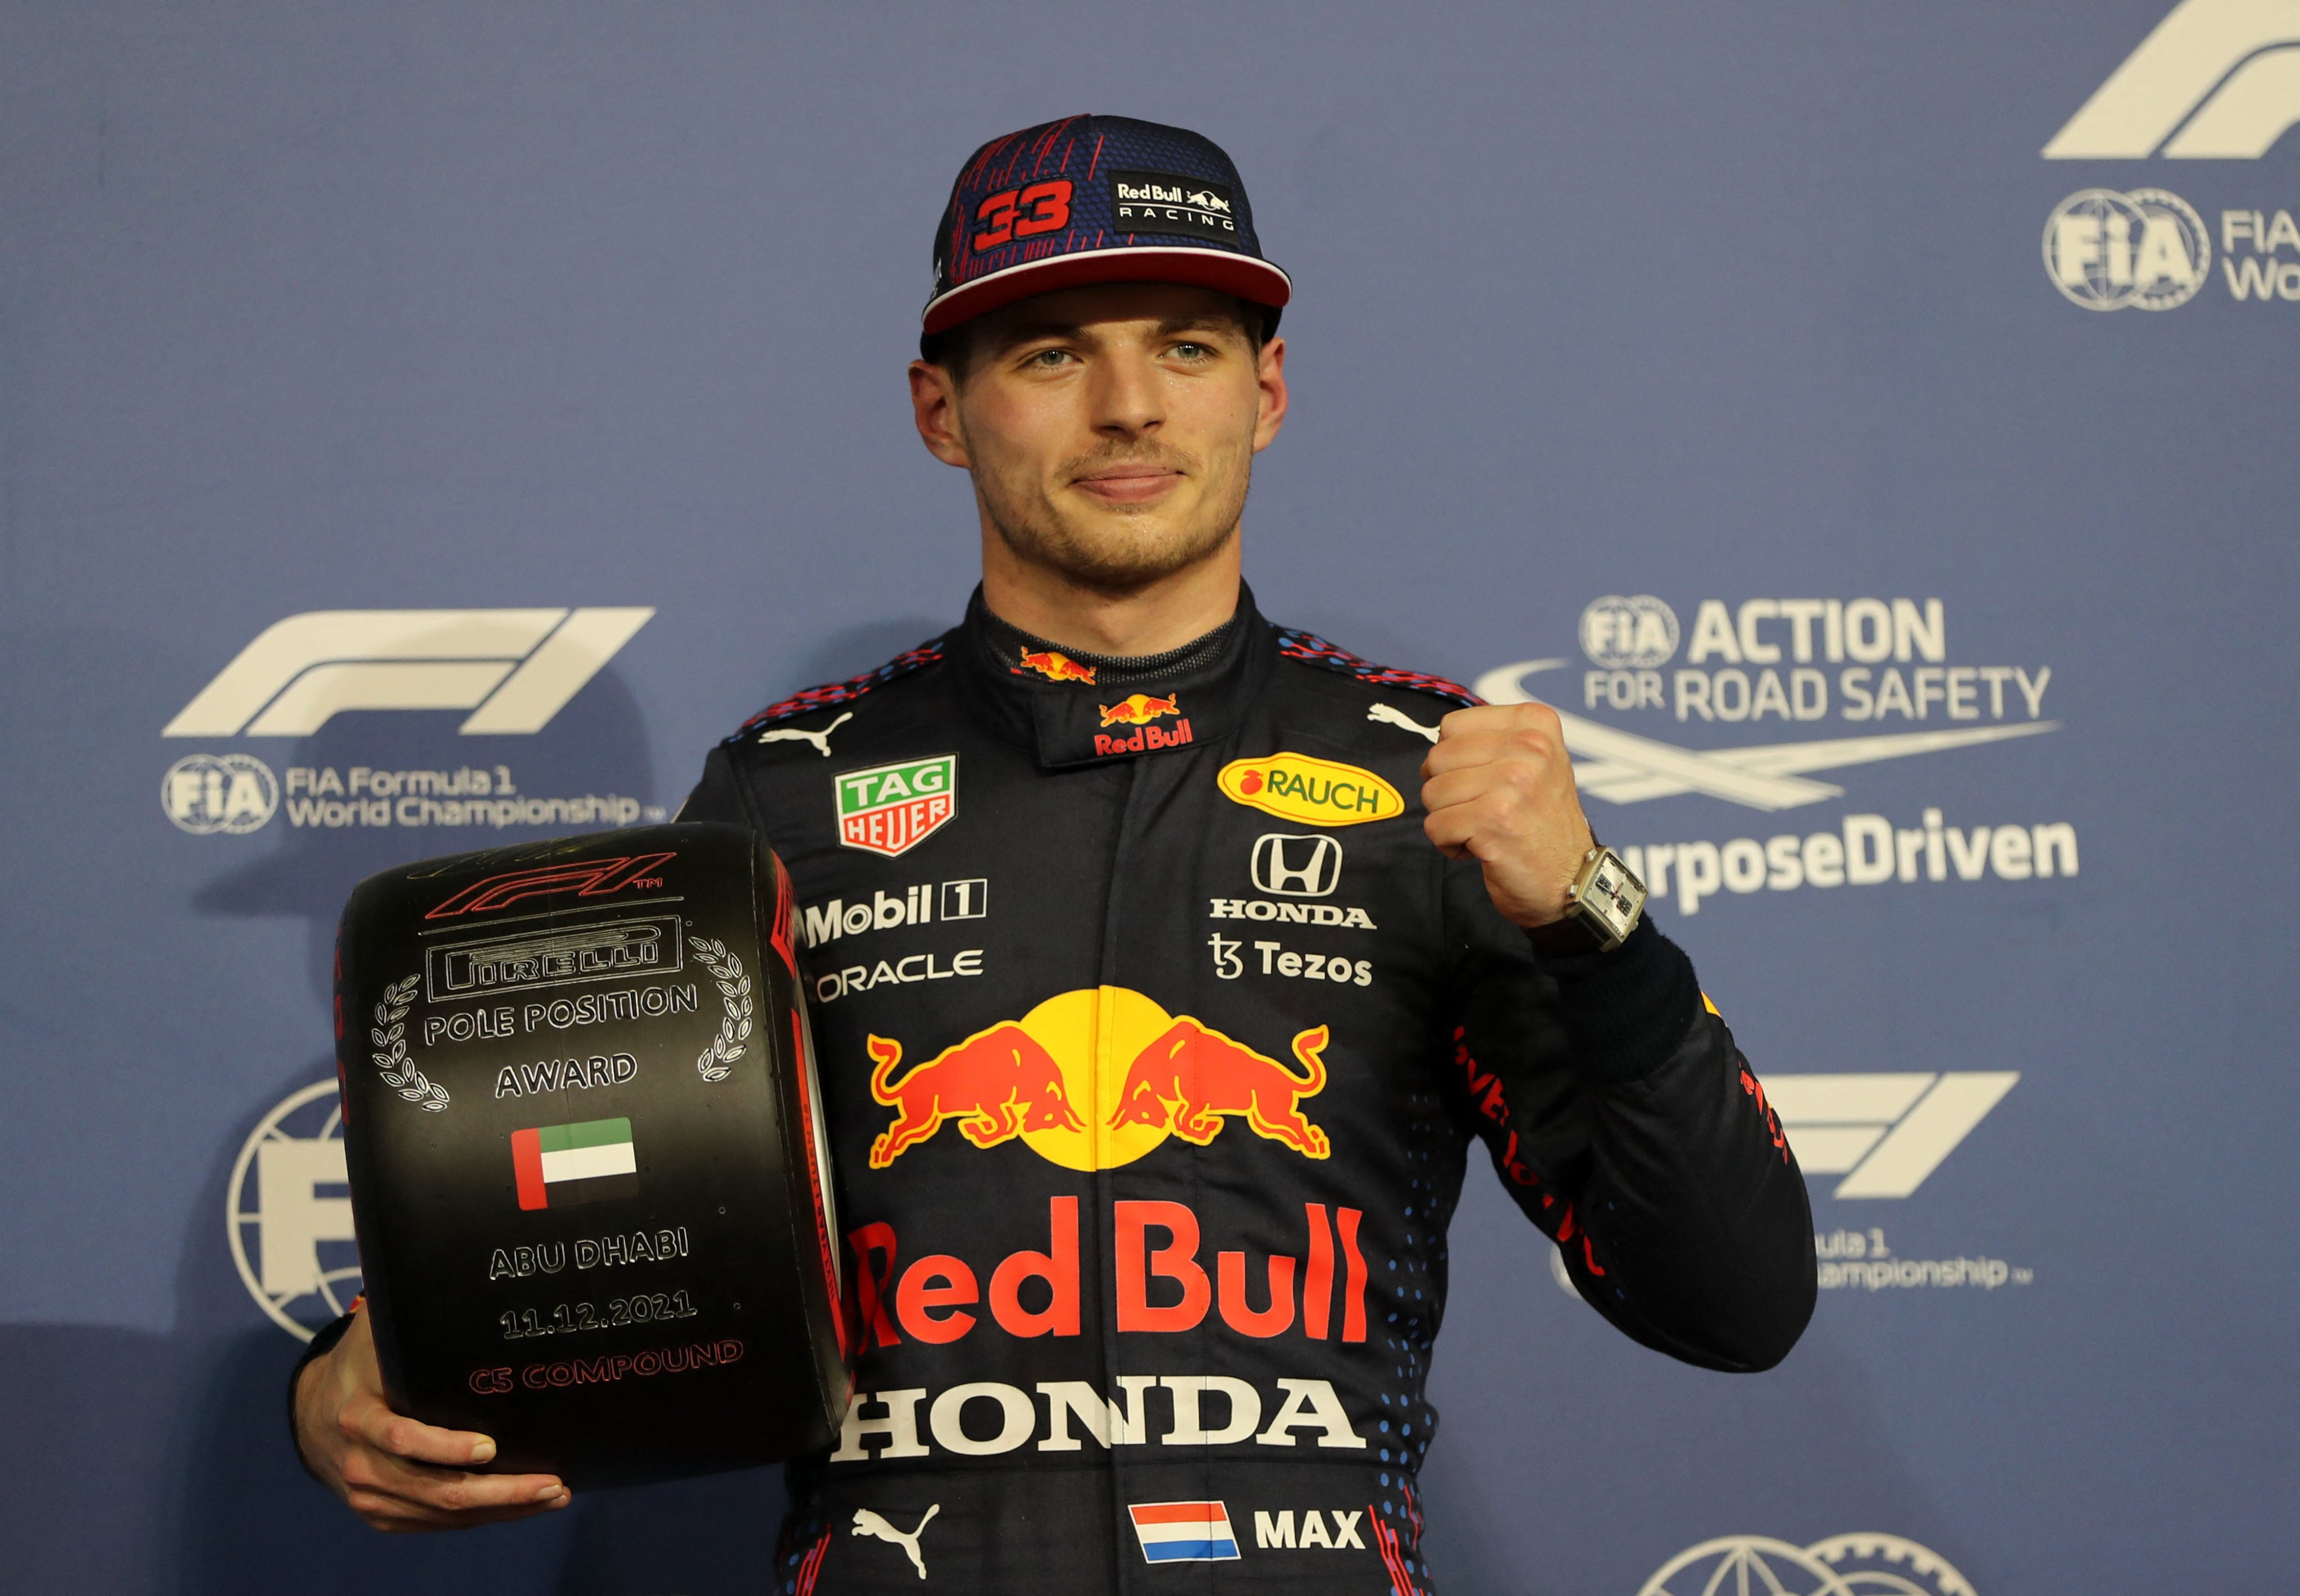 Max Verstappen celebrates after qualifying in pole position for the Abu Dhabi Grand Prix. Photo: Reuters